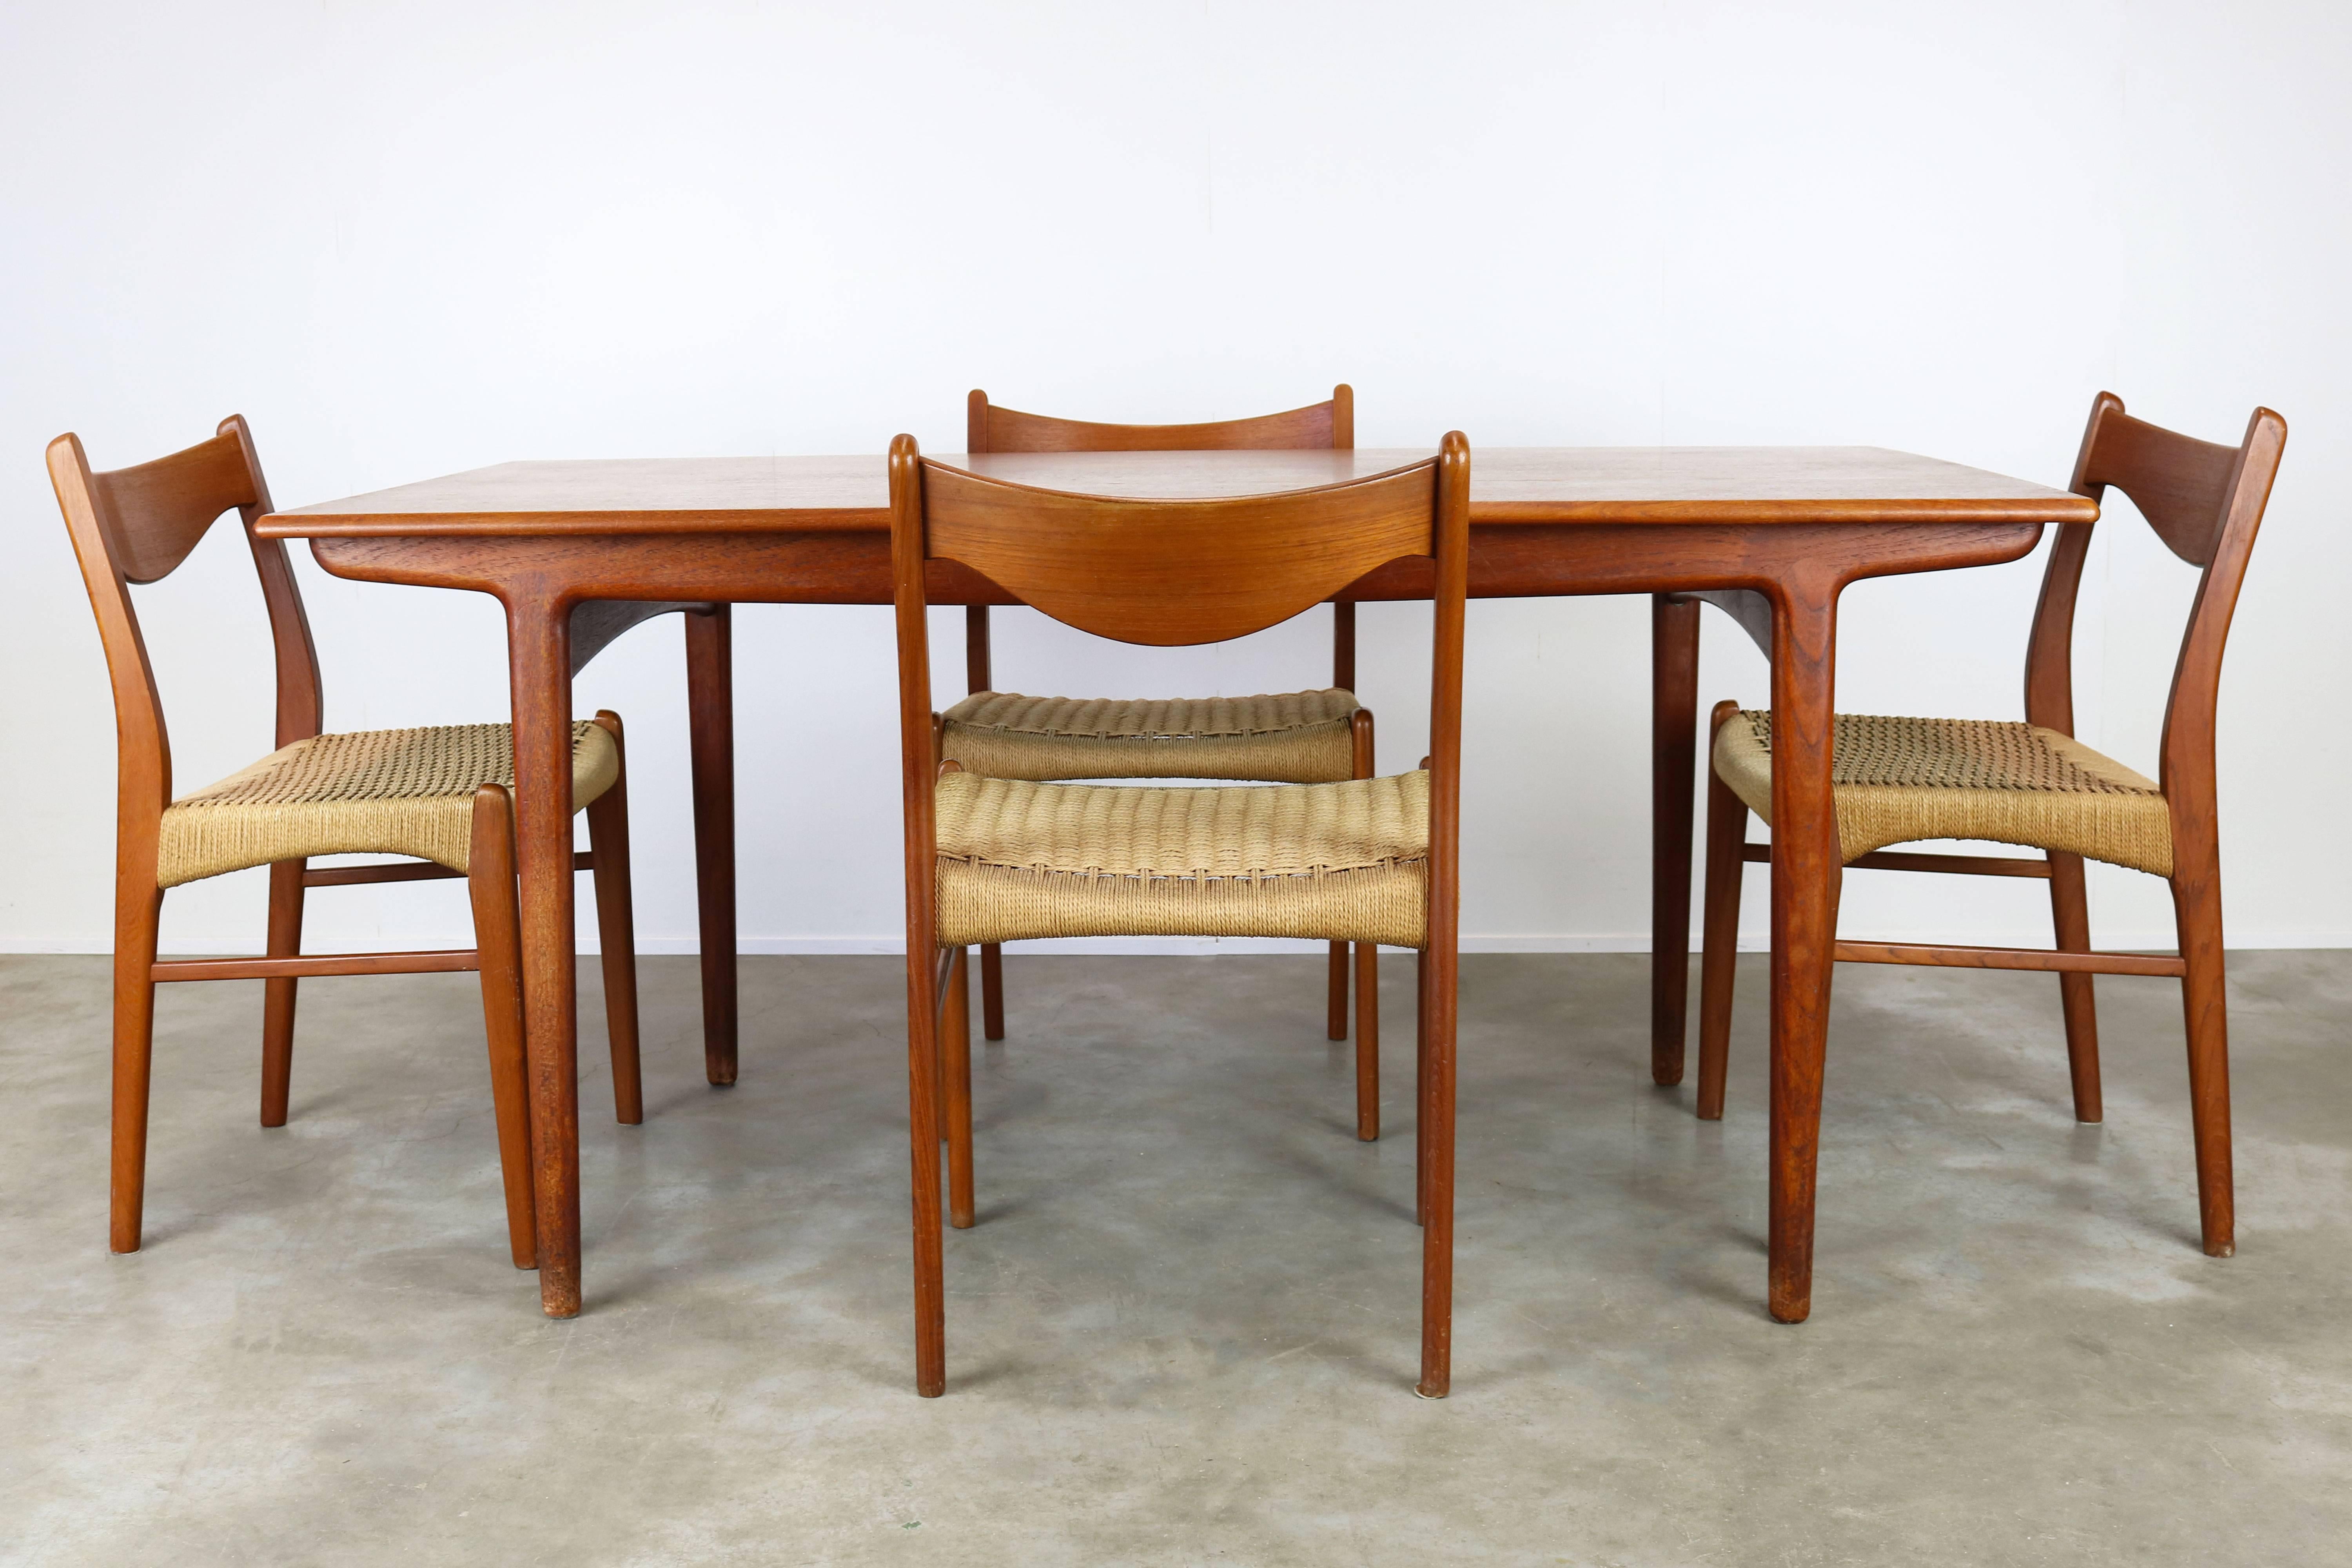 Very rare fully original Dining room set by the famous Danish design duo Ejner Larsen & Aksel Bender Madsen. The set consists of four solid teak and papercord sculpted chairs produced by the Glyngore Stolefabrik in 1950 and a matching sculpted solid